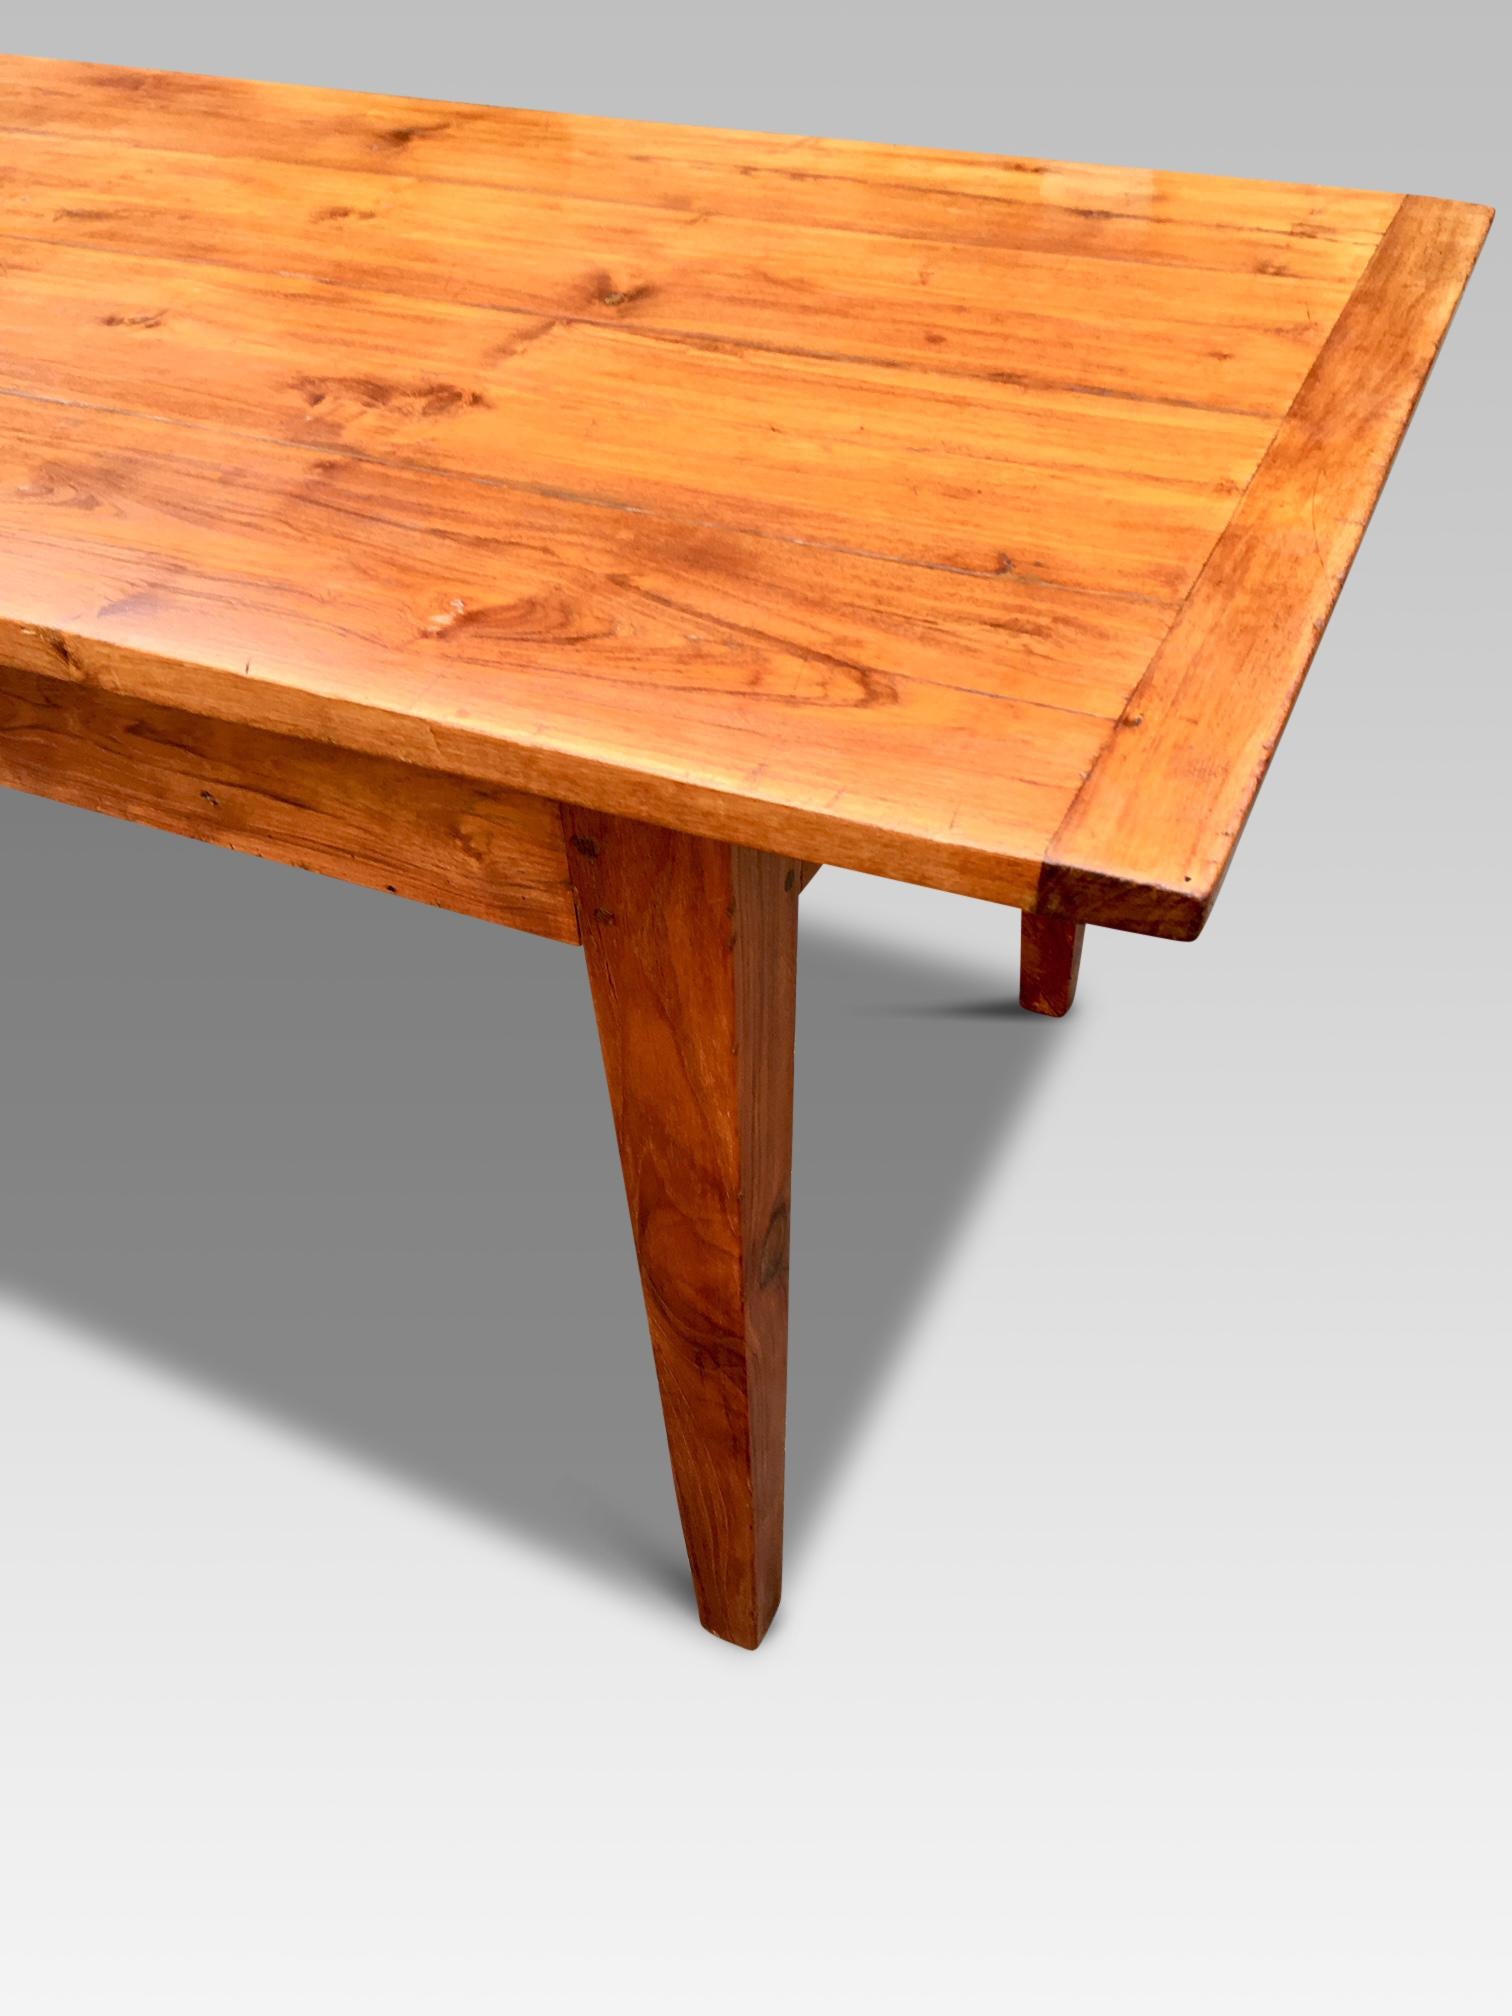 Hand-Crafted 19th century Chestnut Farmhouse Table. French C 1880